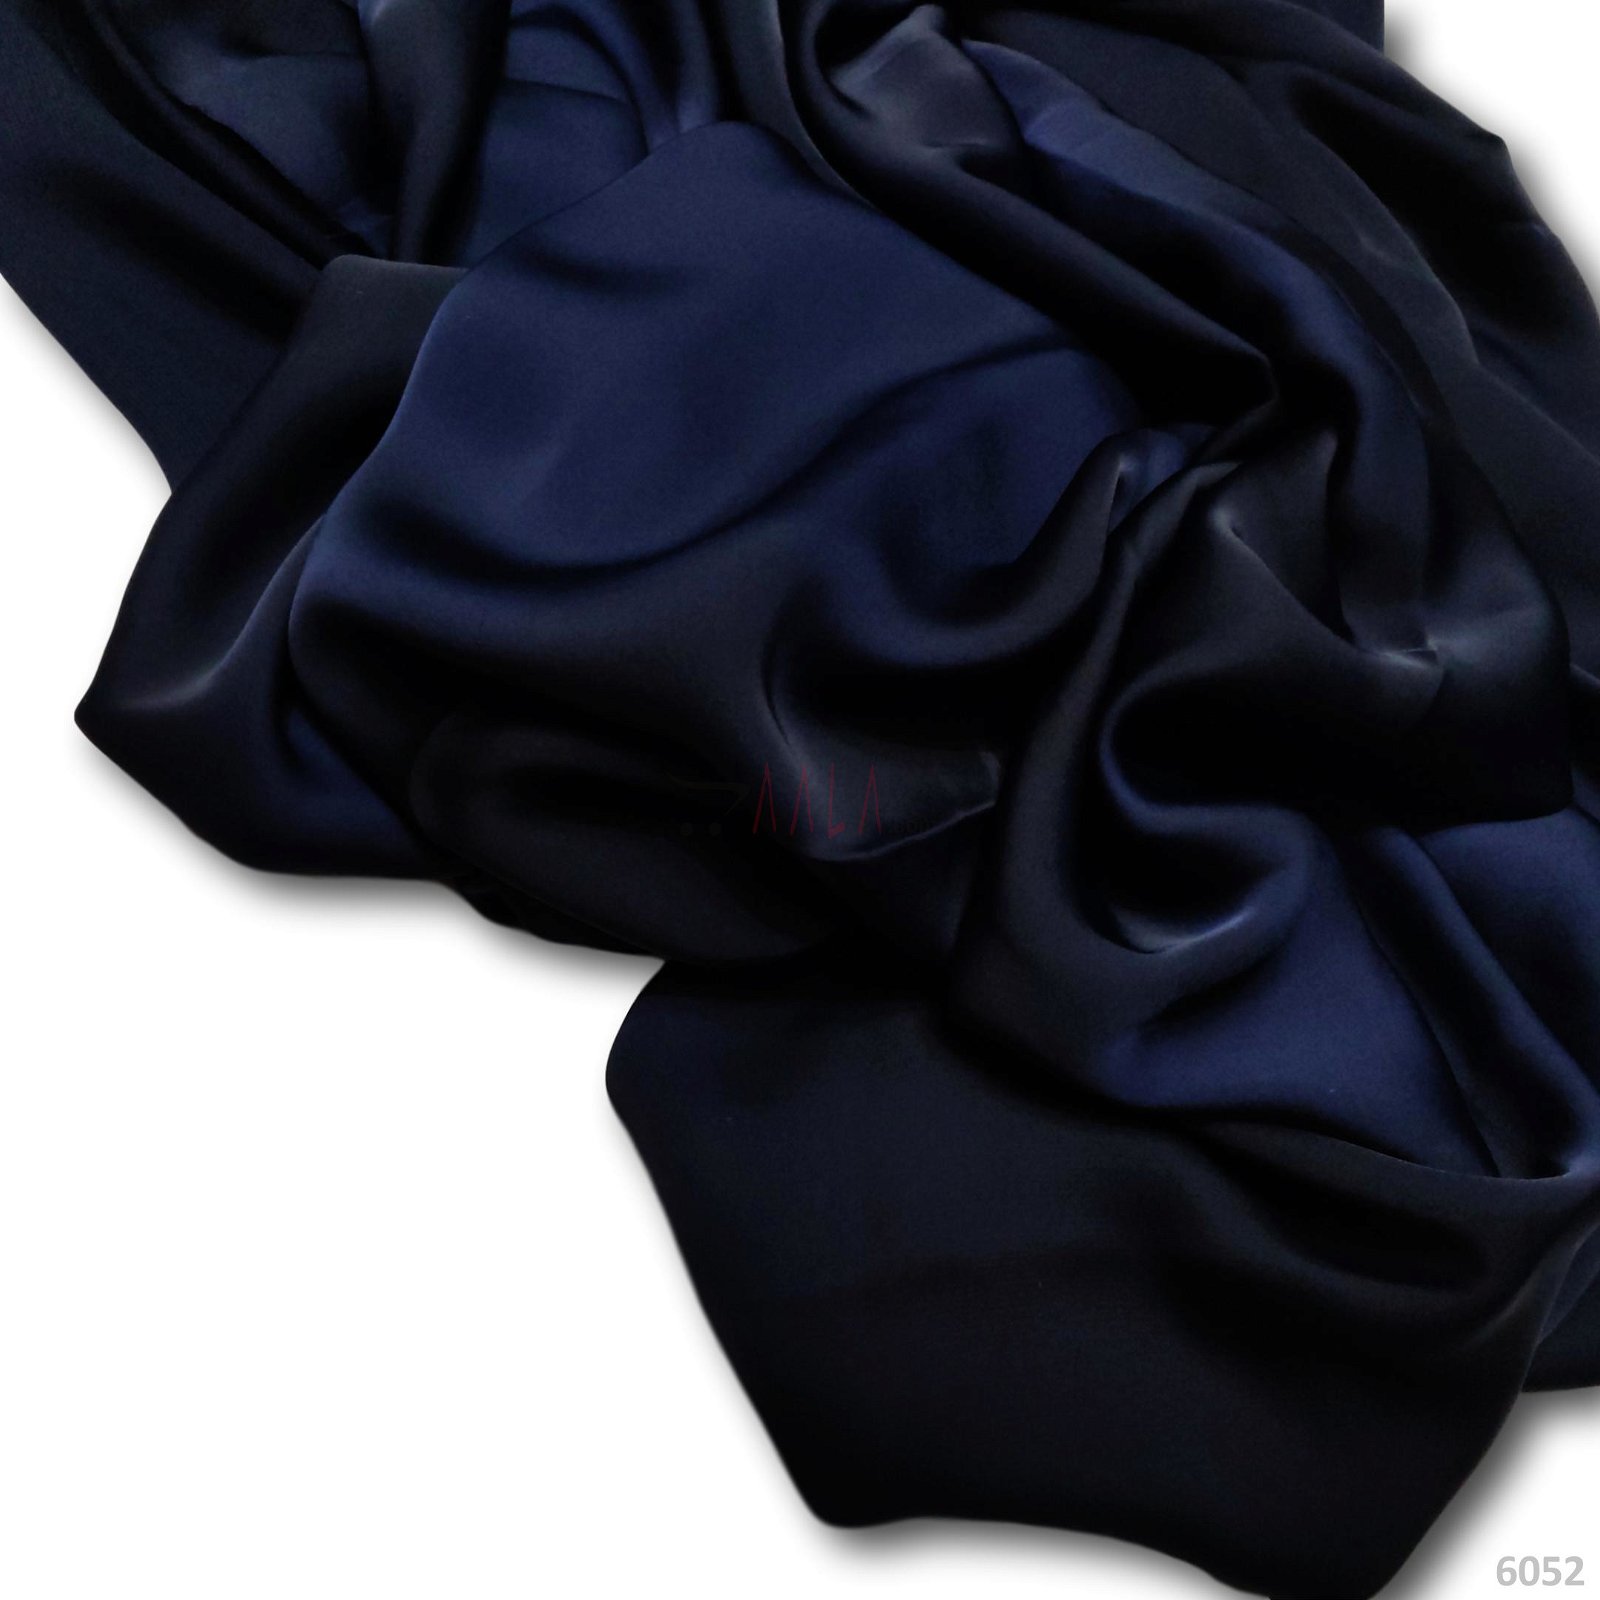 Tizzy Satin Georgette 58 Inches Dyed Per Metre #6052